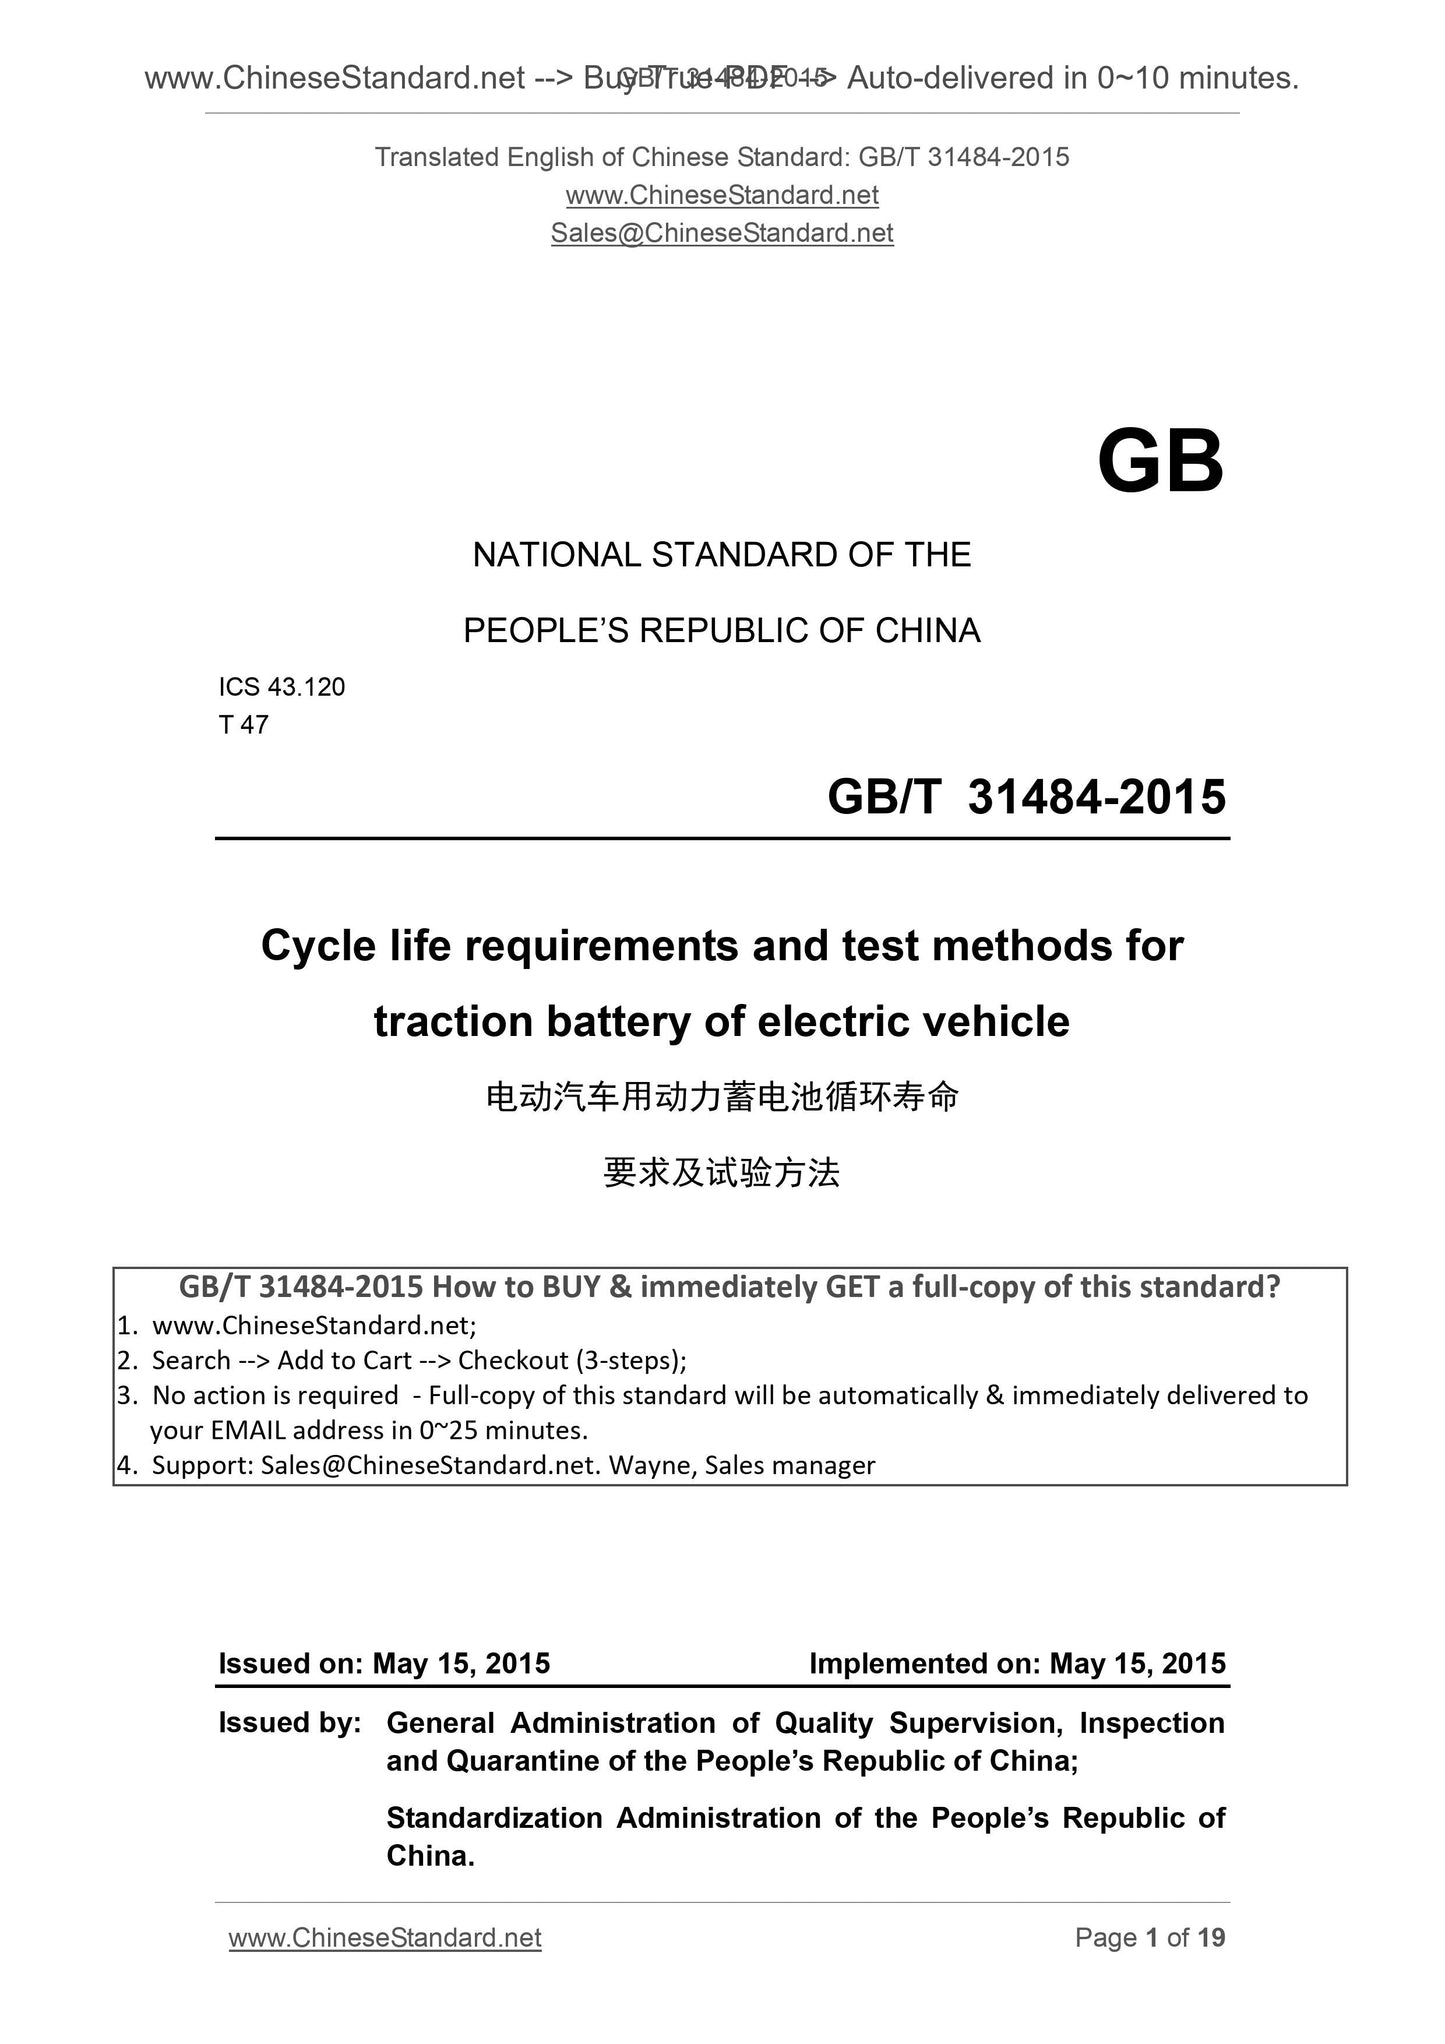 GB/T 31484-2015 Page 1